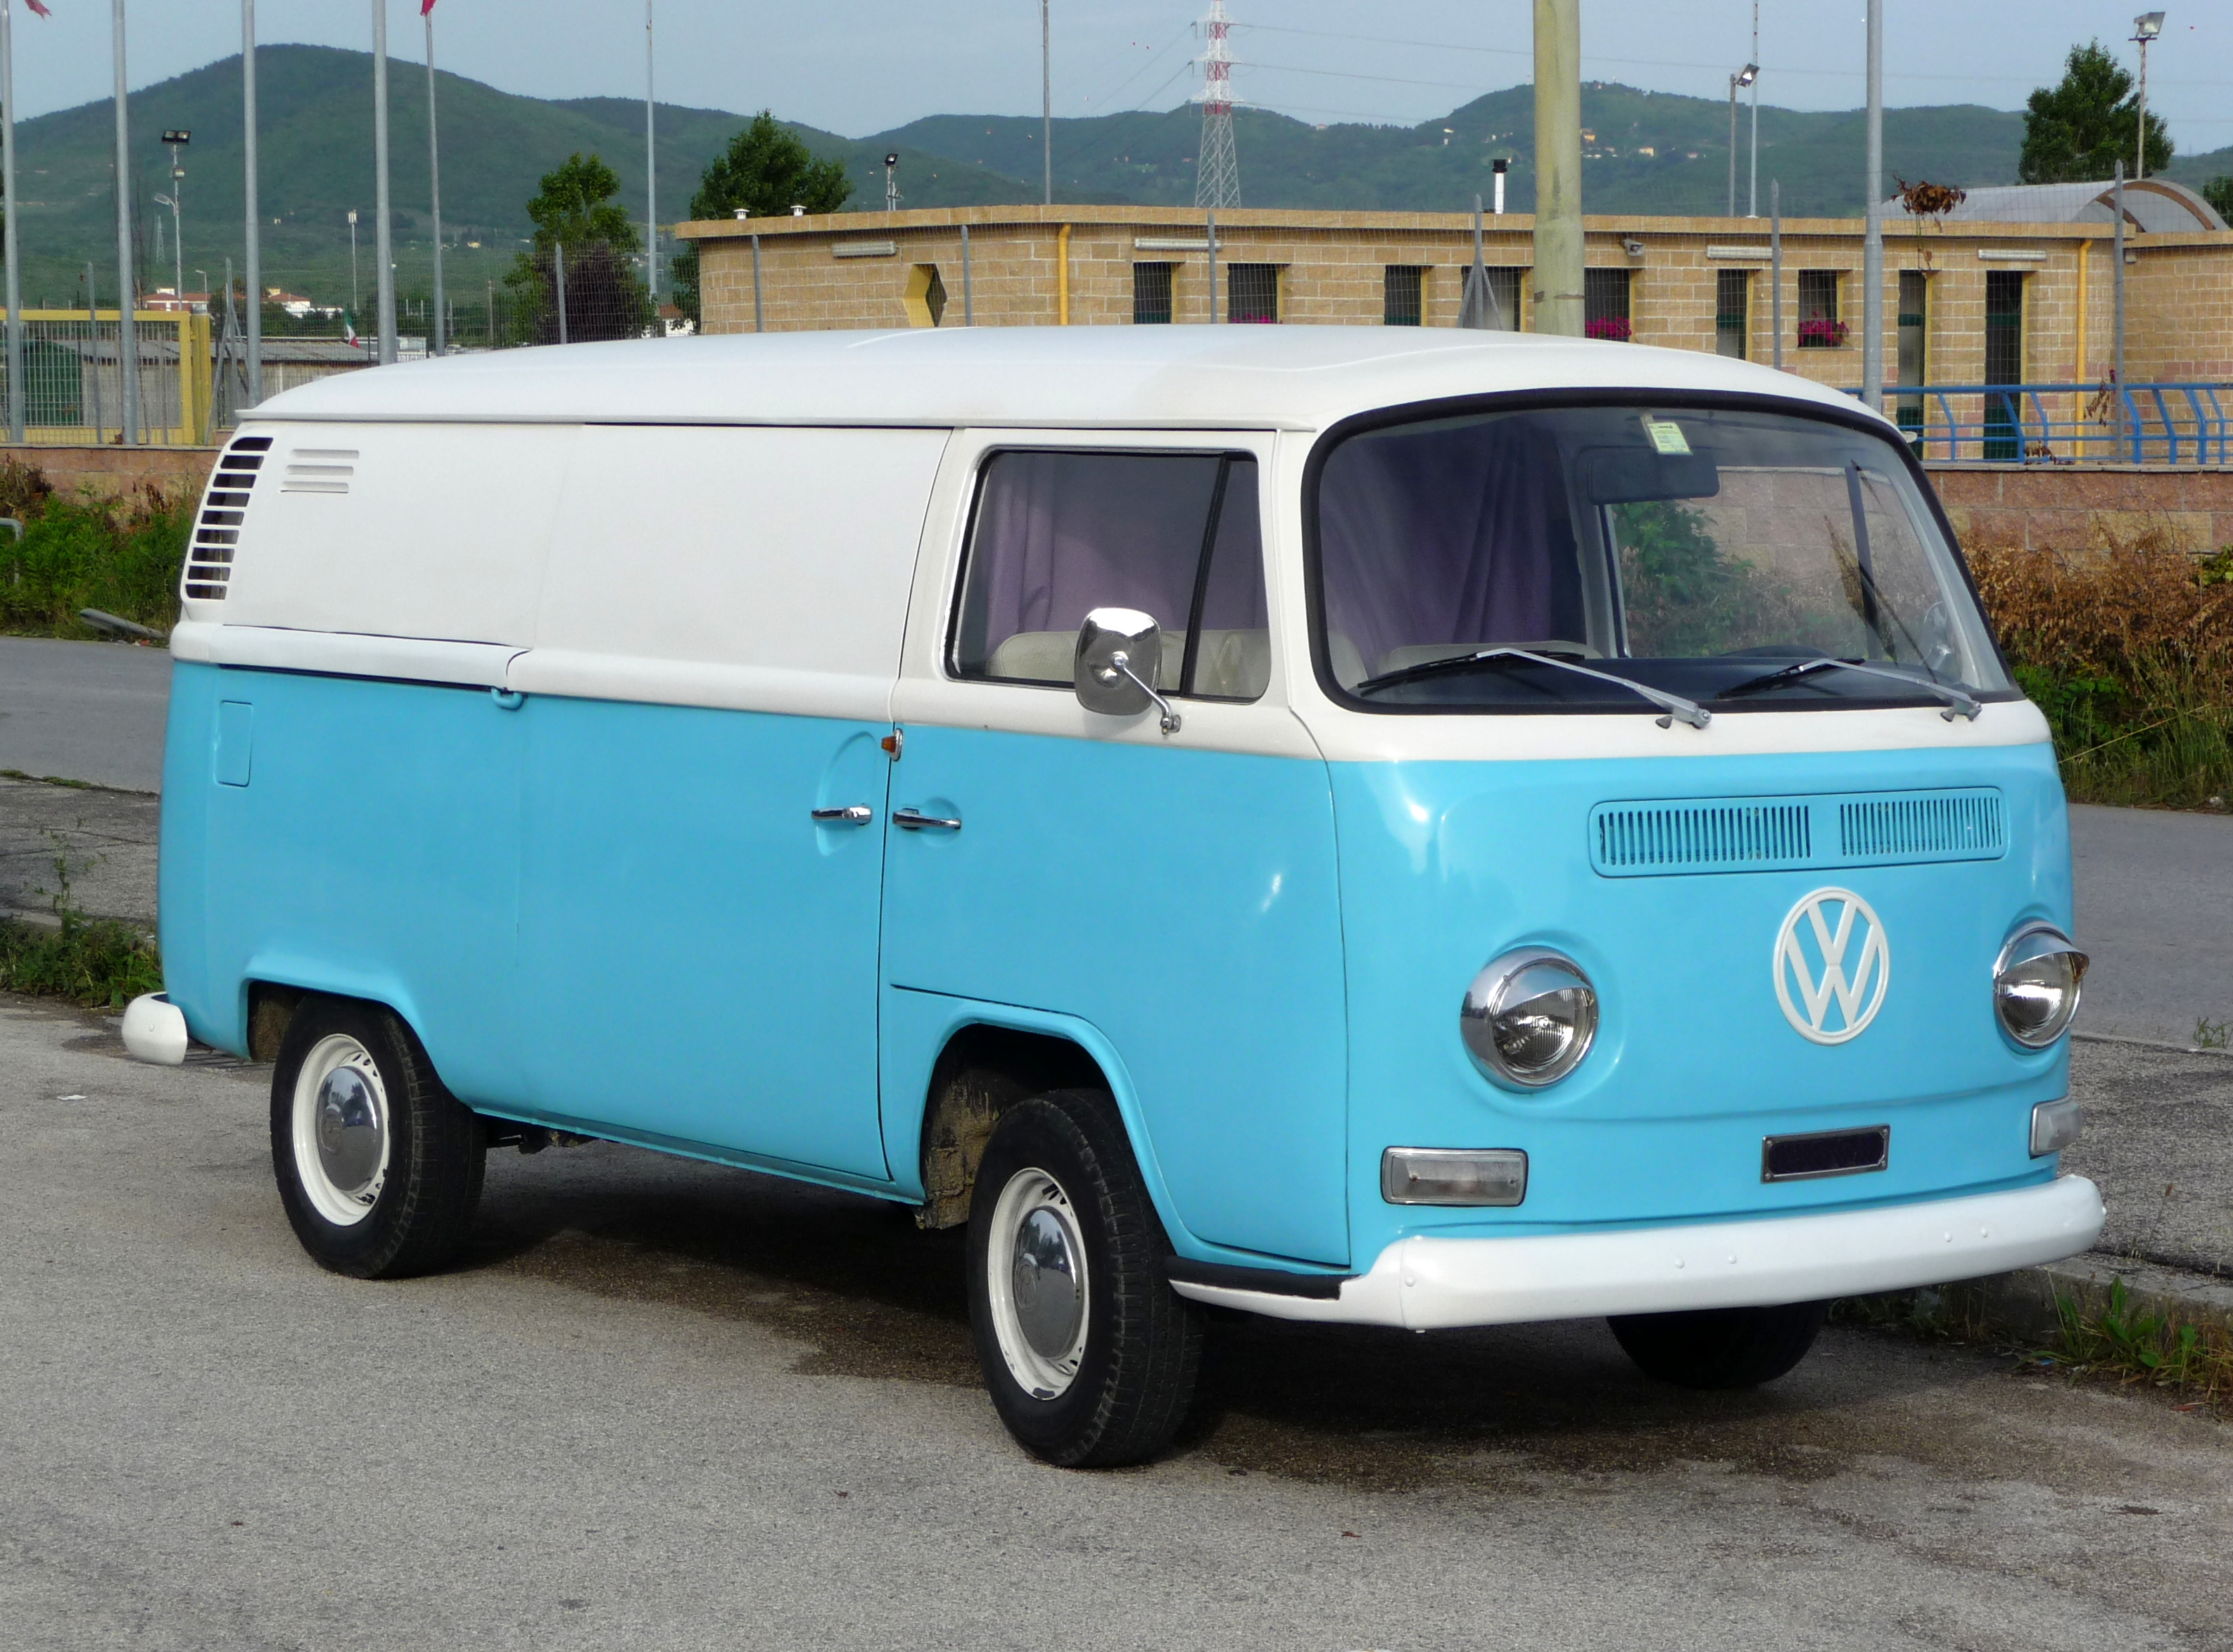 Volkswagen T2 photos PhotoGallery with 11 pics